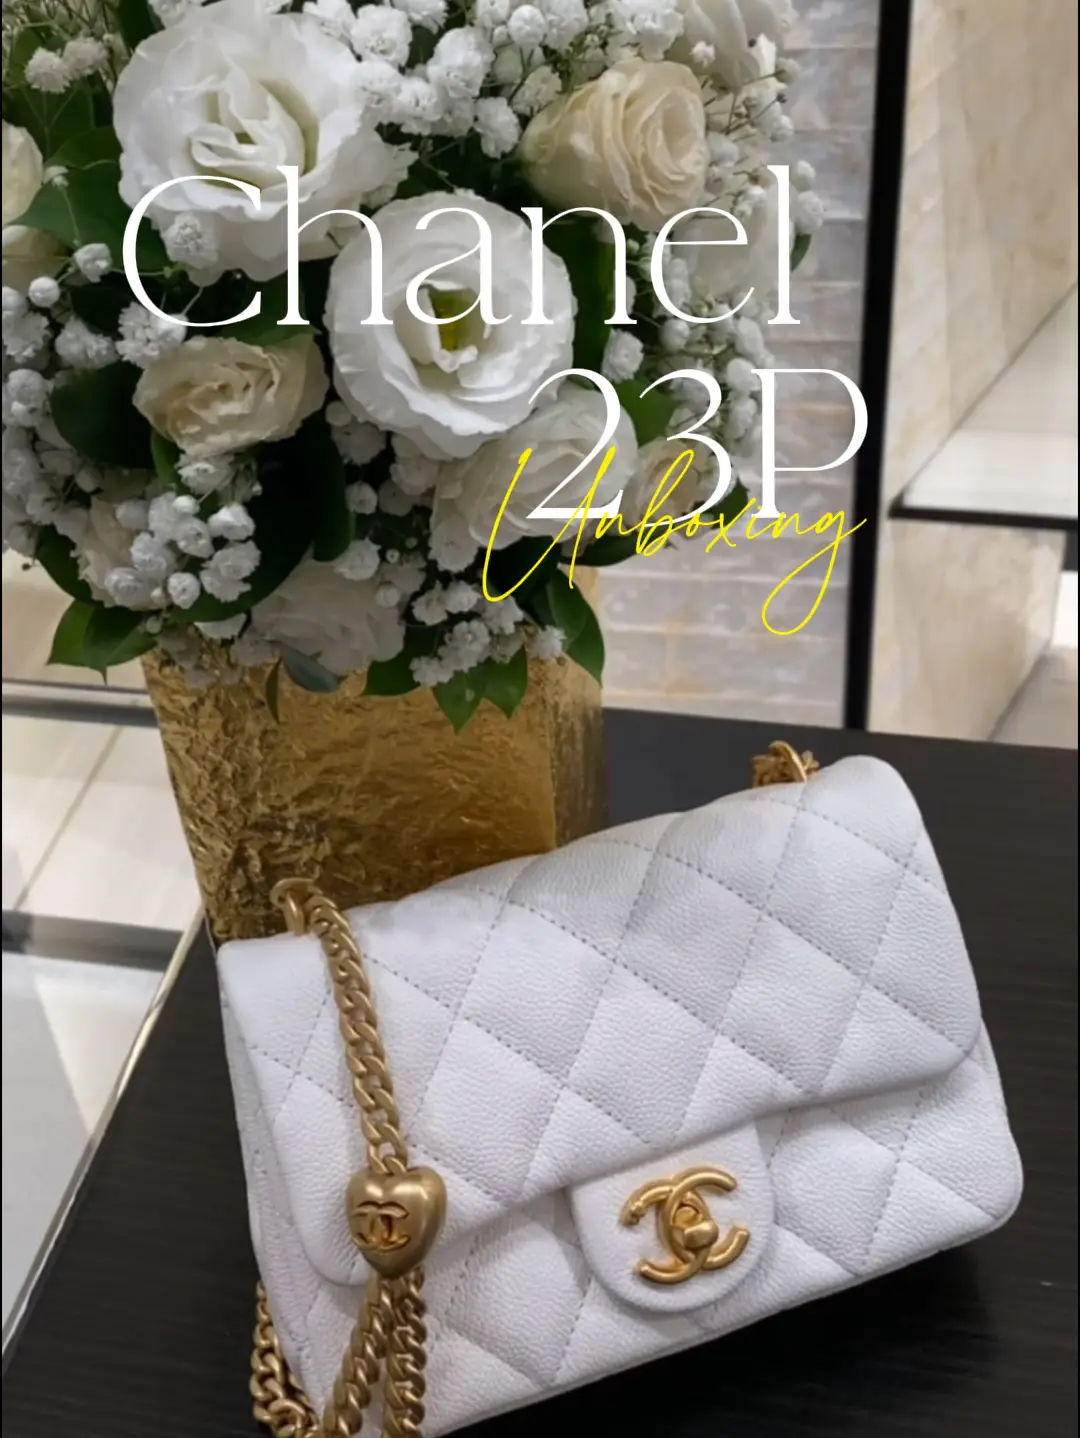 Chanel 23P Bag Unboxing  Video published by etherealpeonies